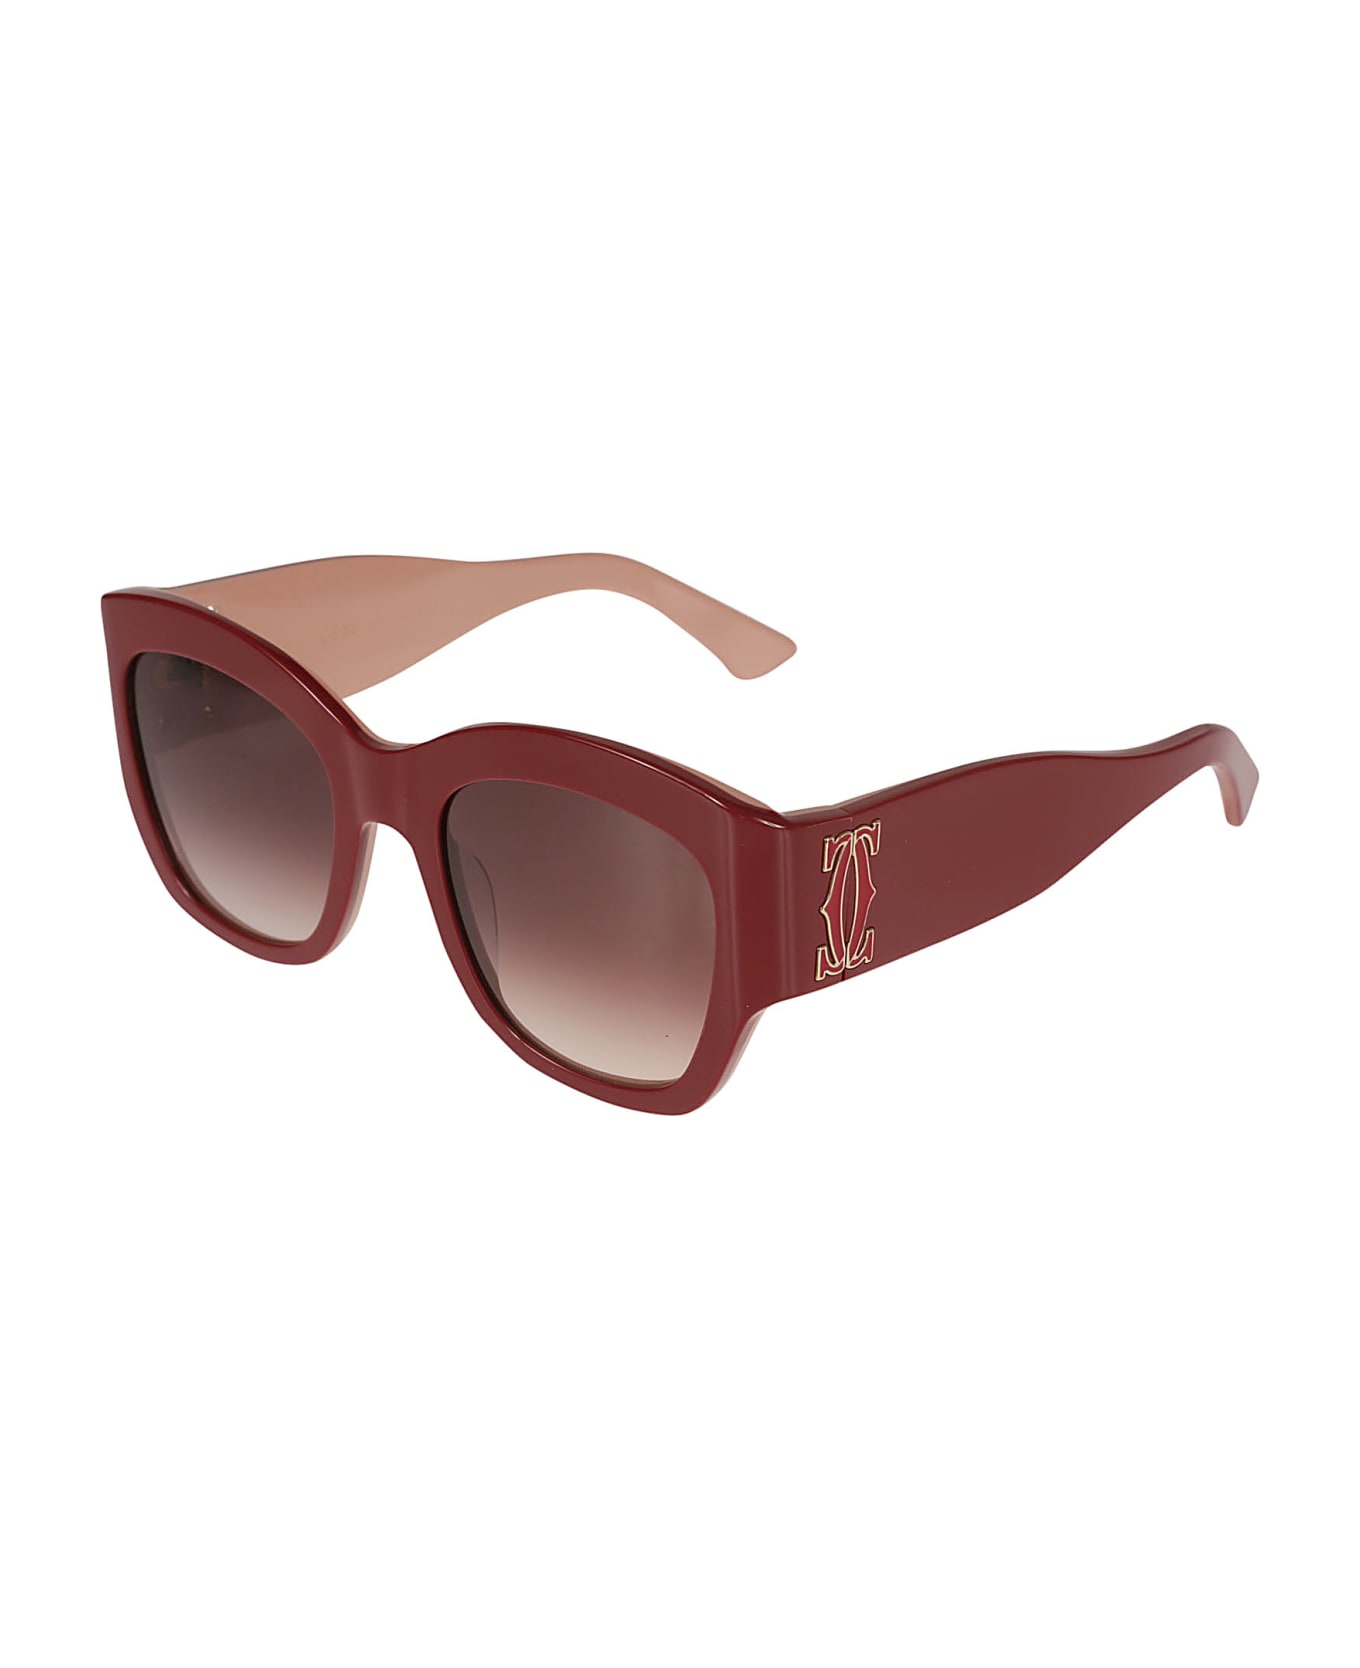 Cartier Eyewear Curved Square Sunglasses - Burgundy Red